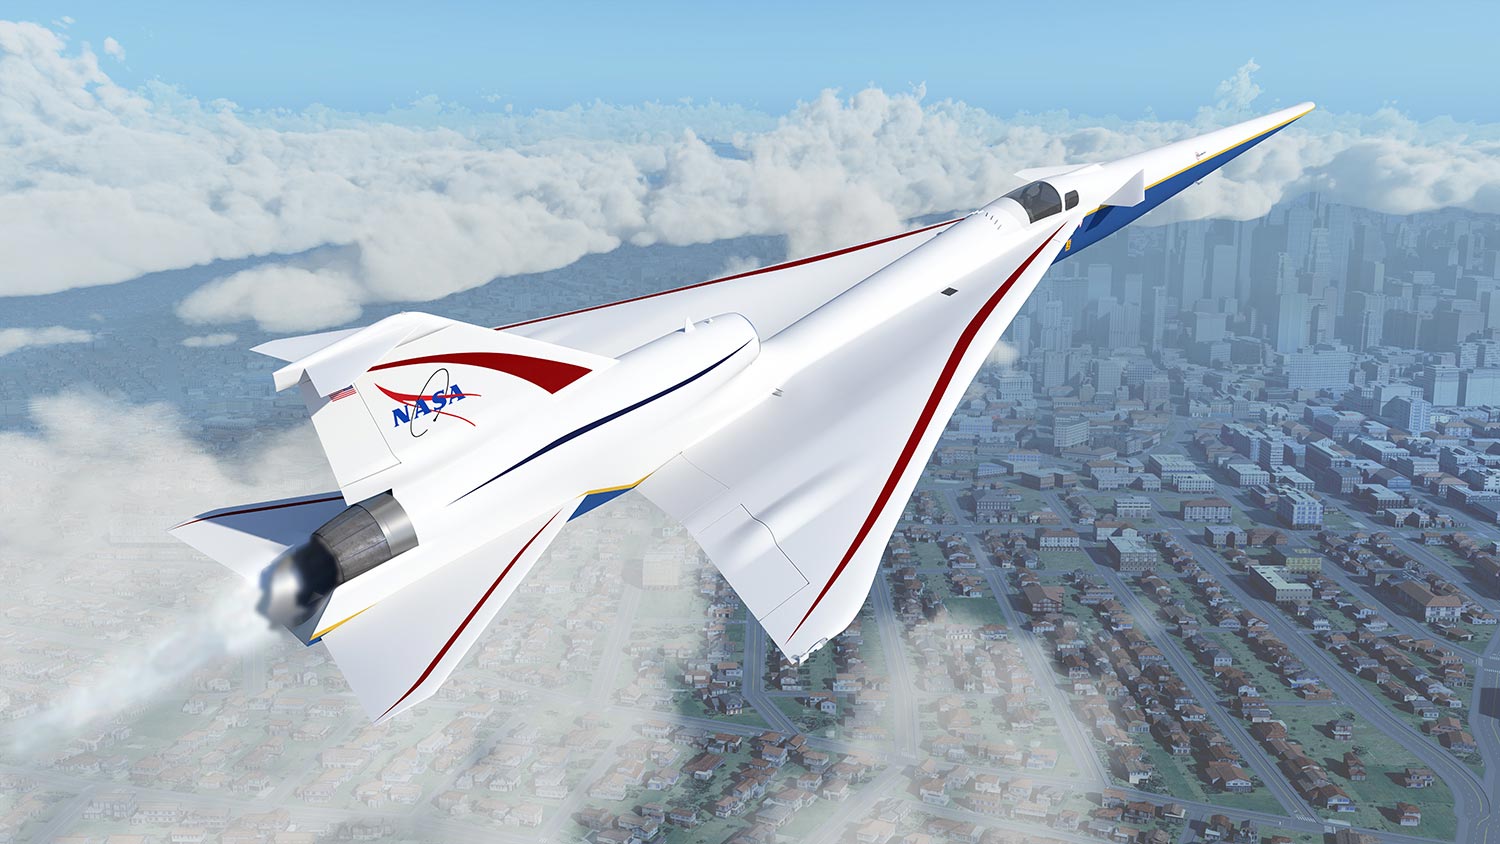 Jet Engine Installed on NASA’s X-59 QueSST Quiet Supersonic Aircraft | Science